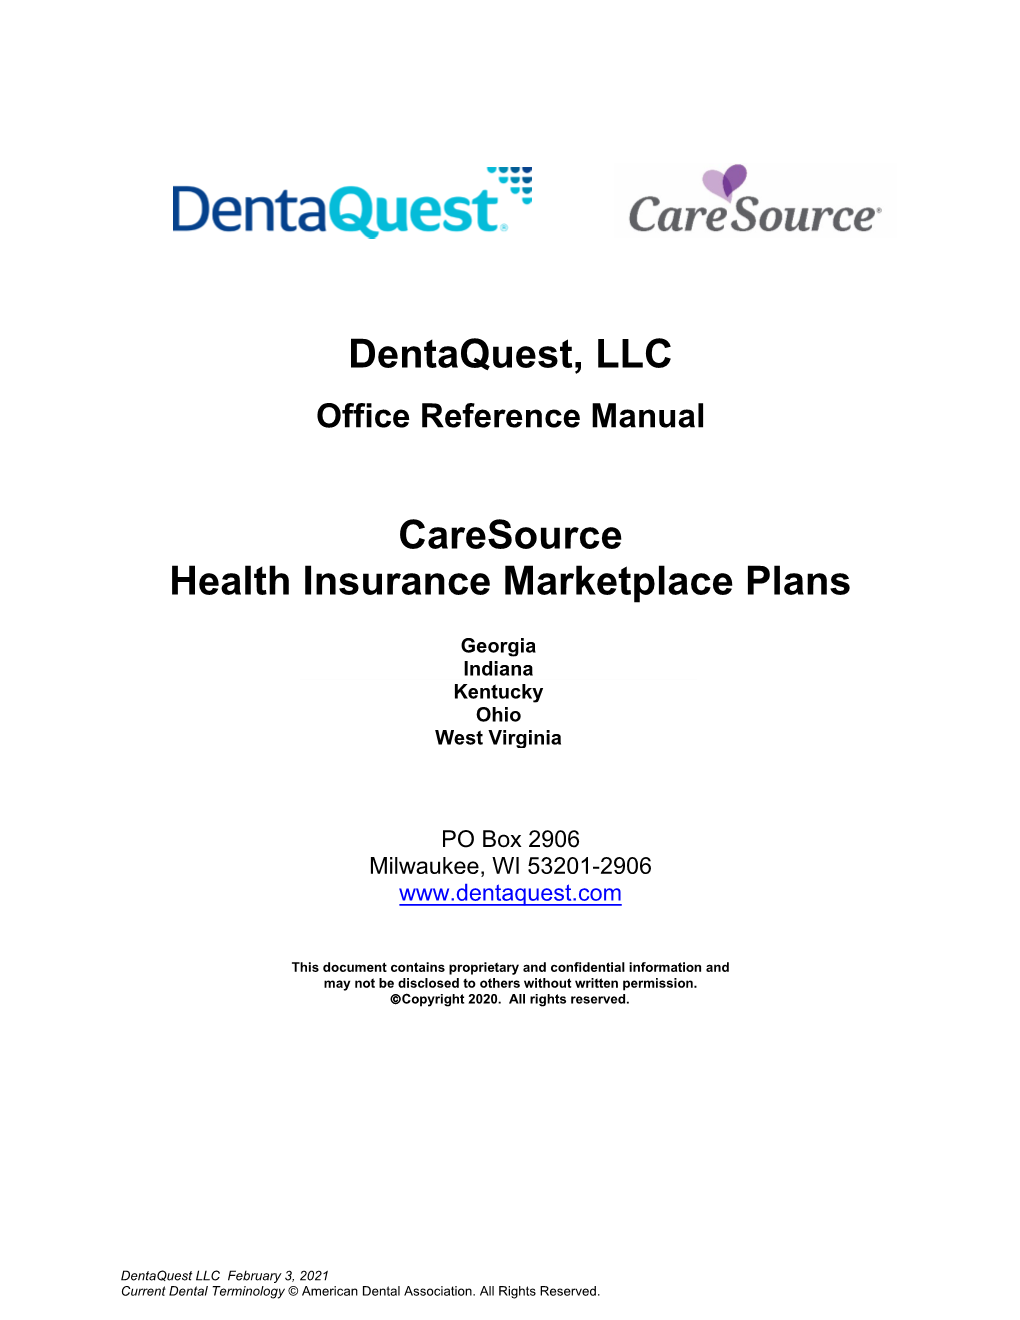 Caresource Marketplace Office Reference Manual